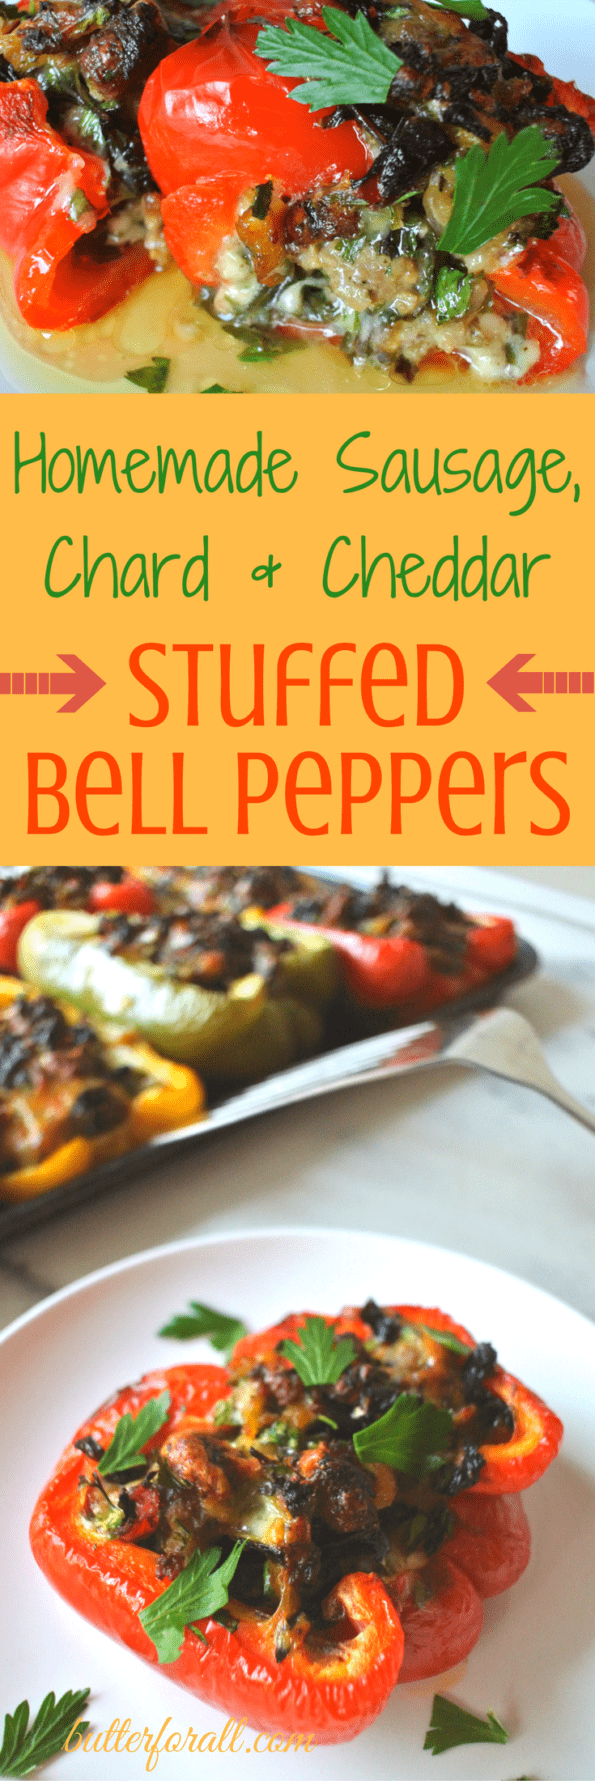 A collage of stuffed bell peppers and text overlay.